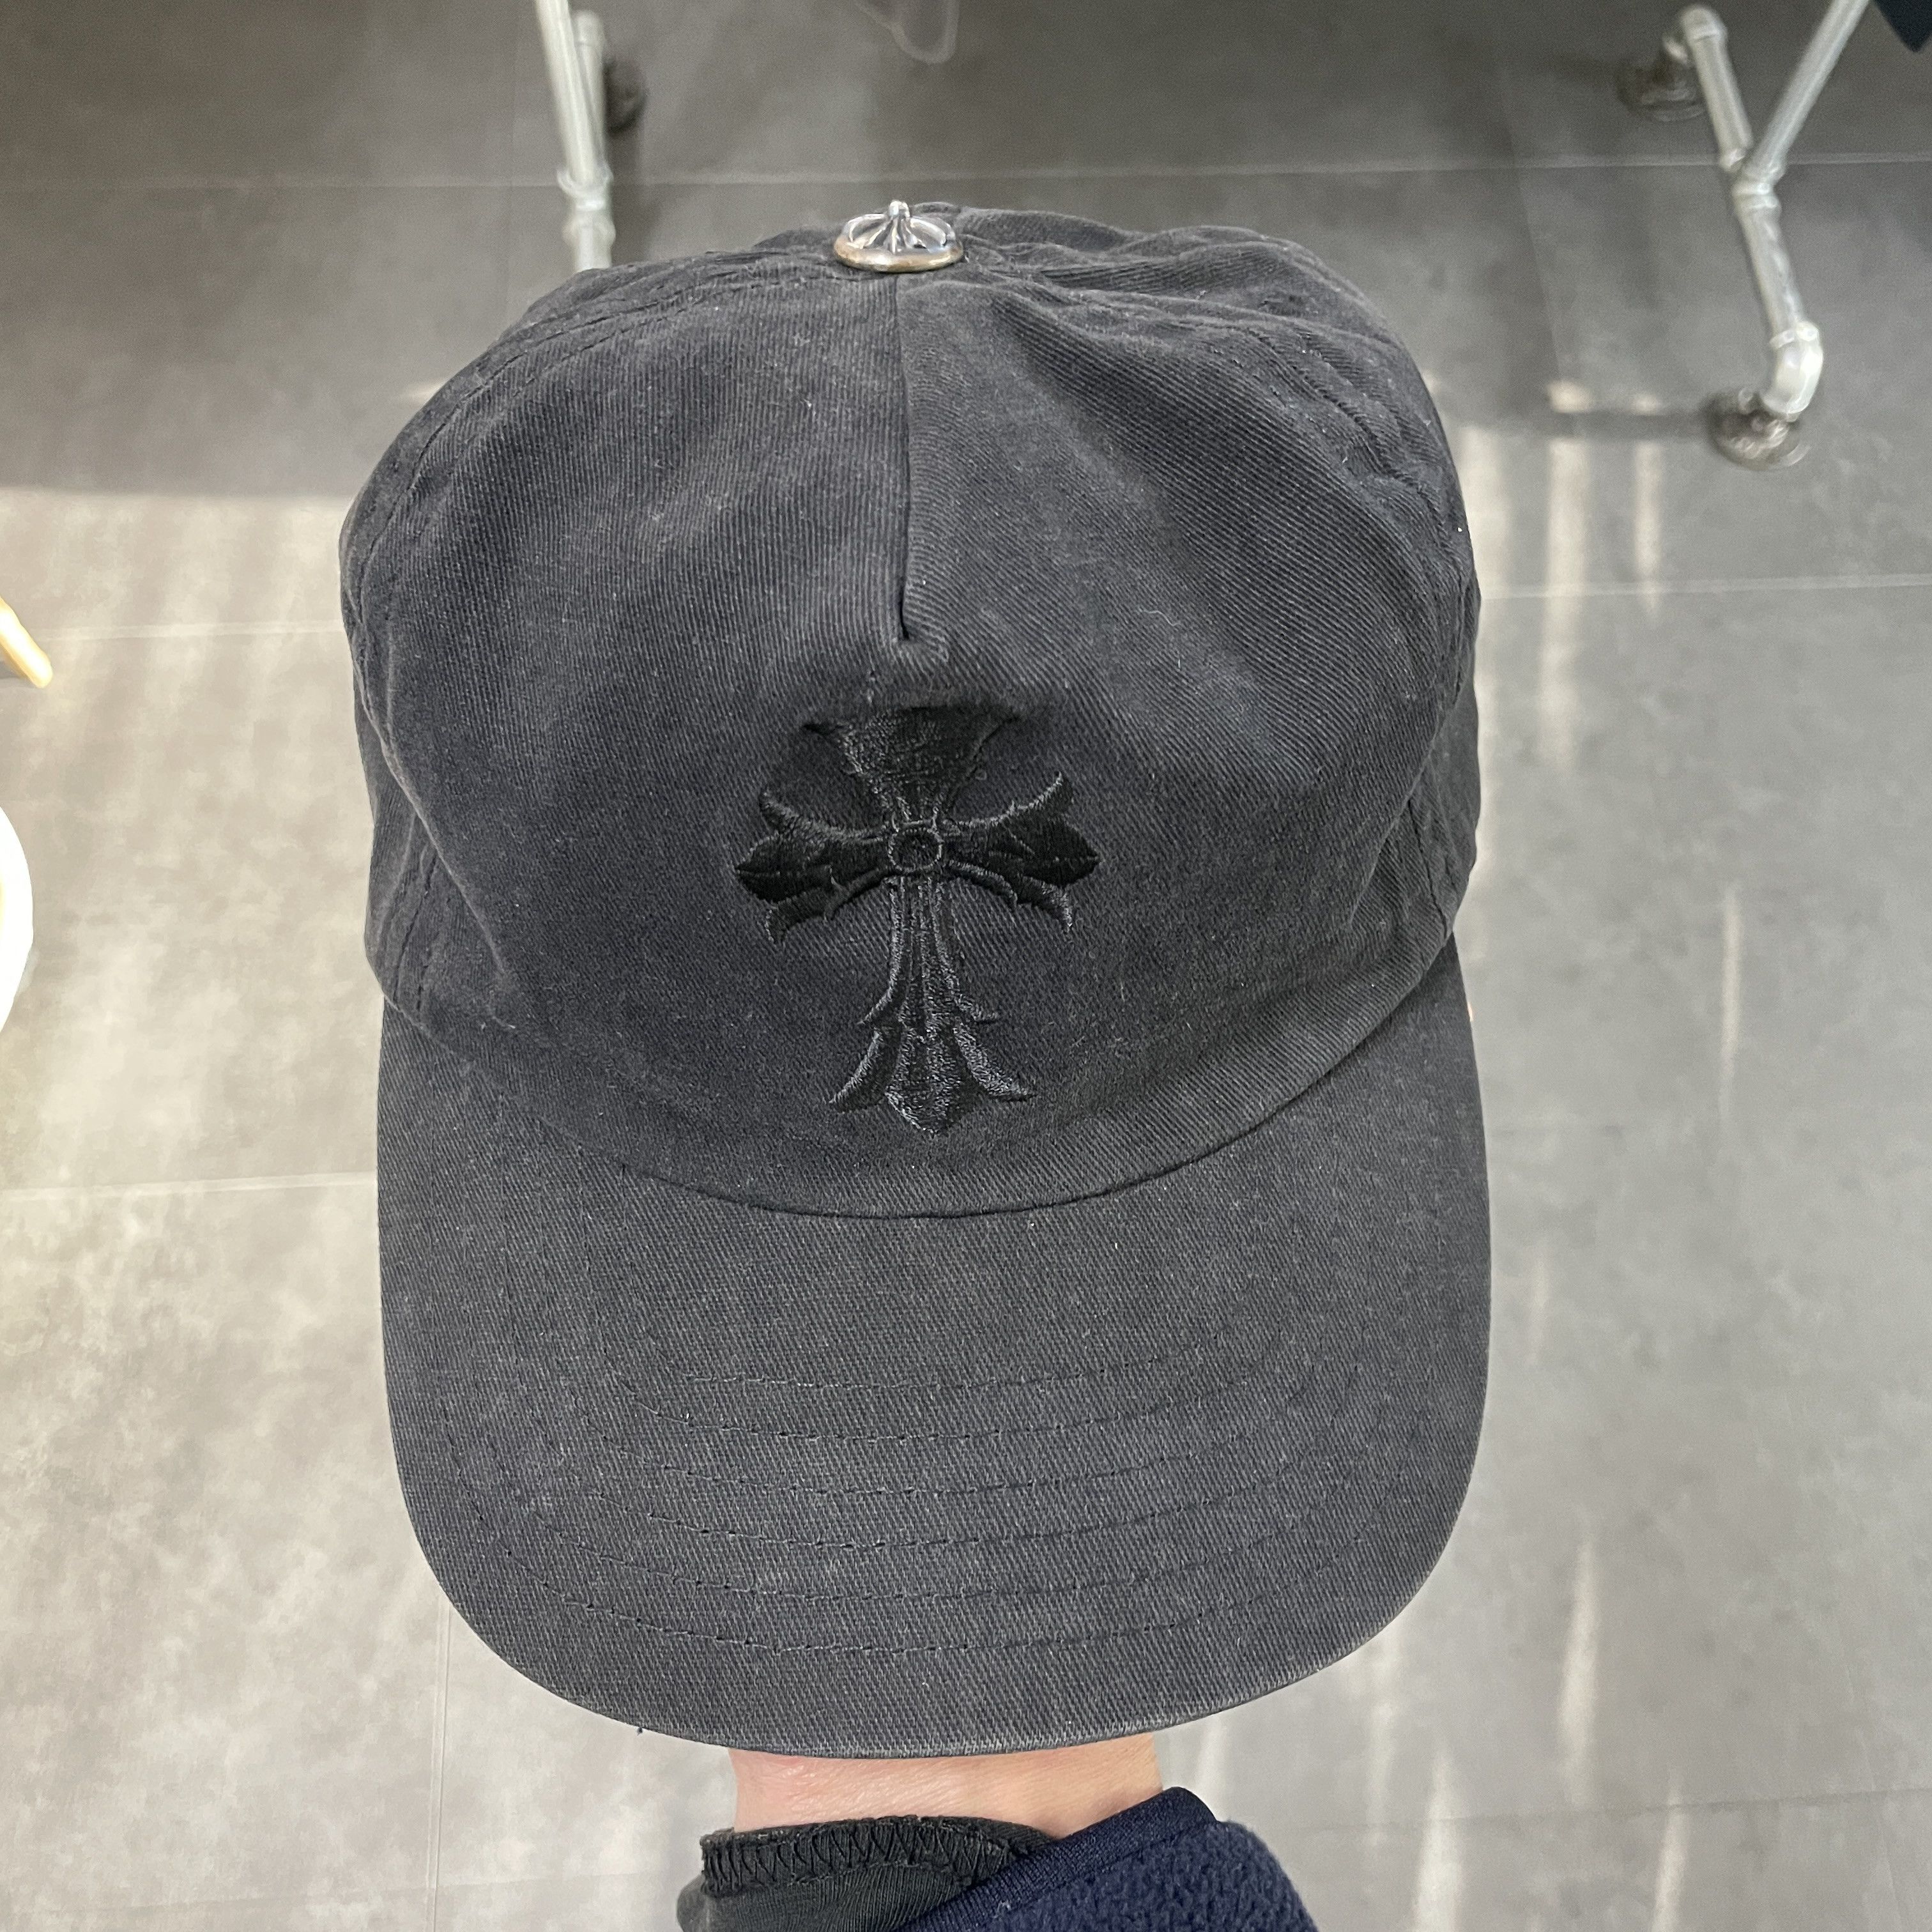 Elevation of Style: Chrome Hearts Cross Patch Black Hat